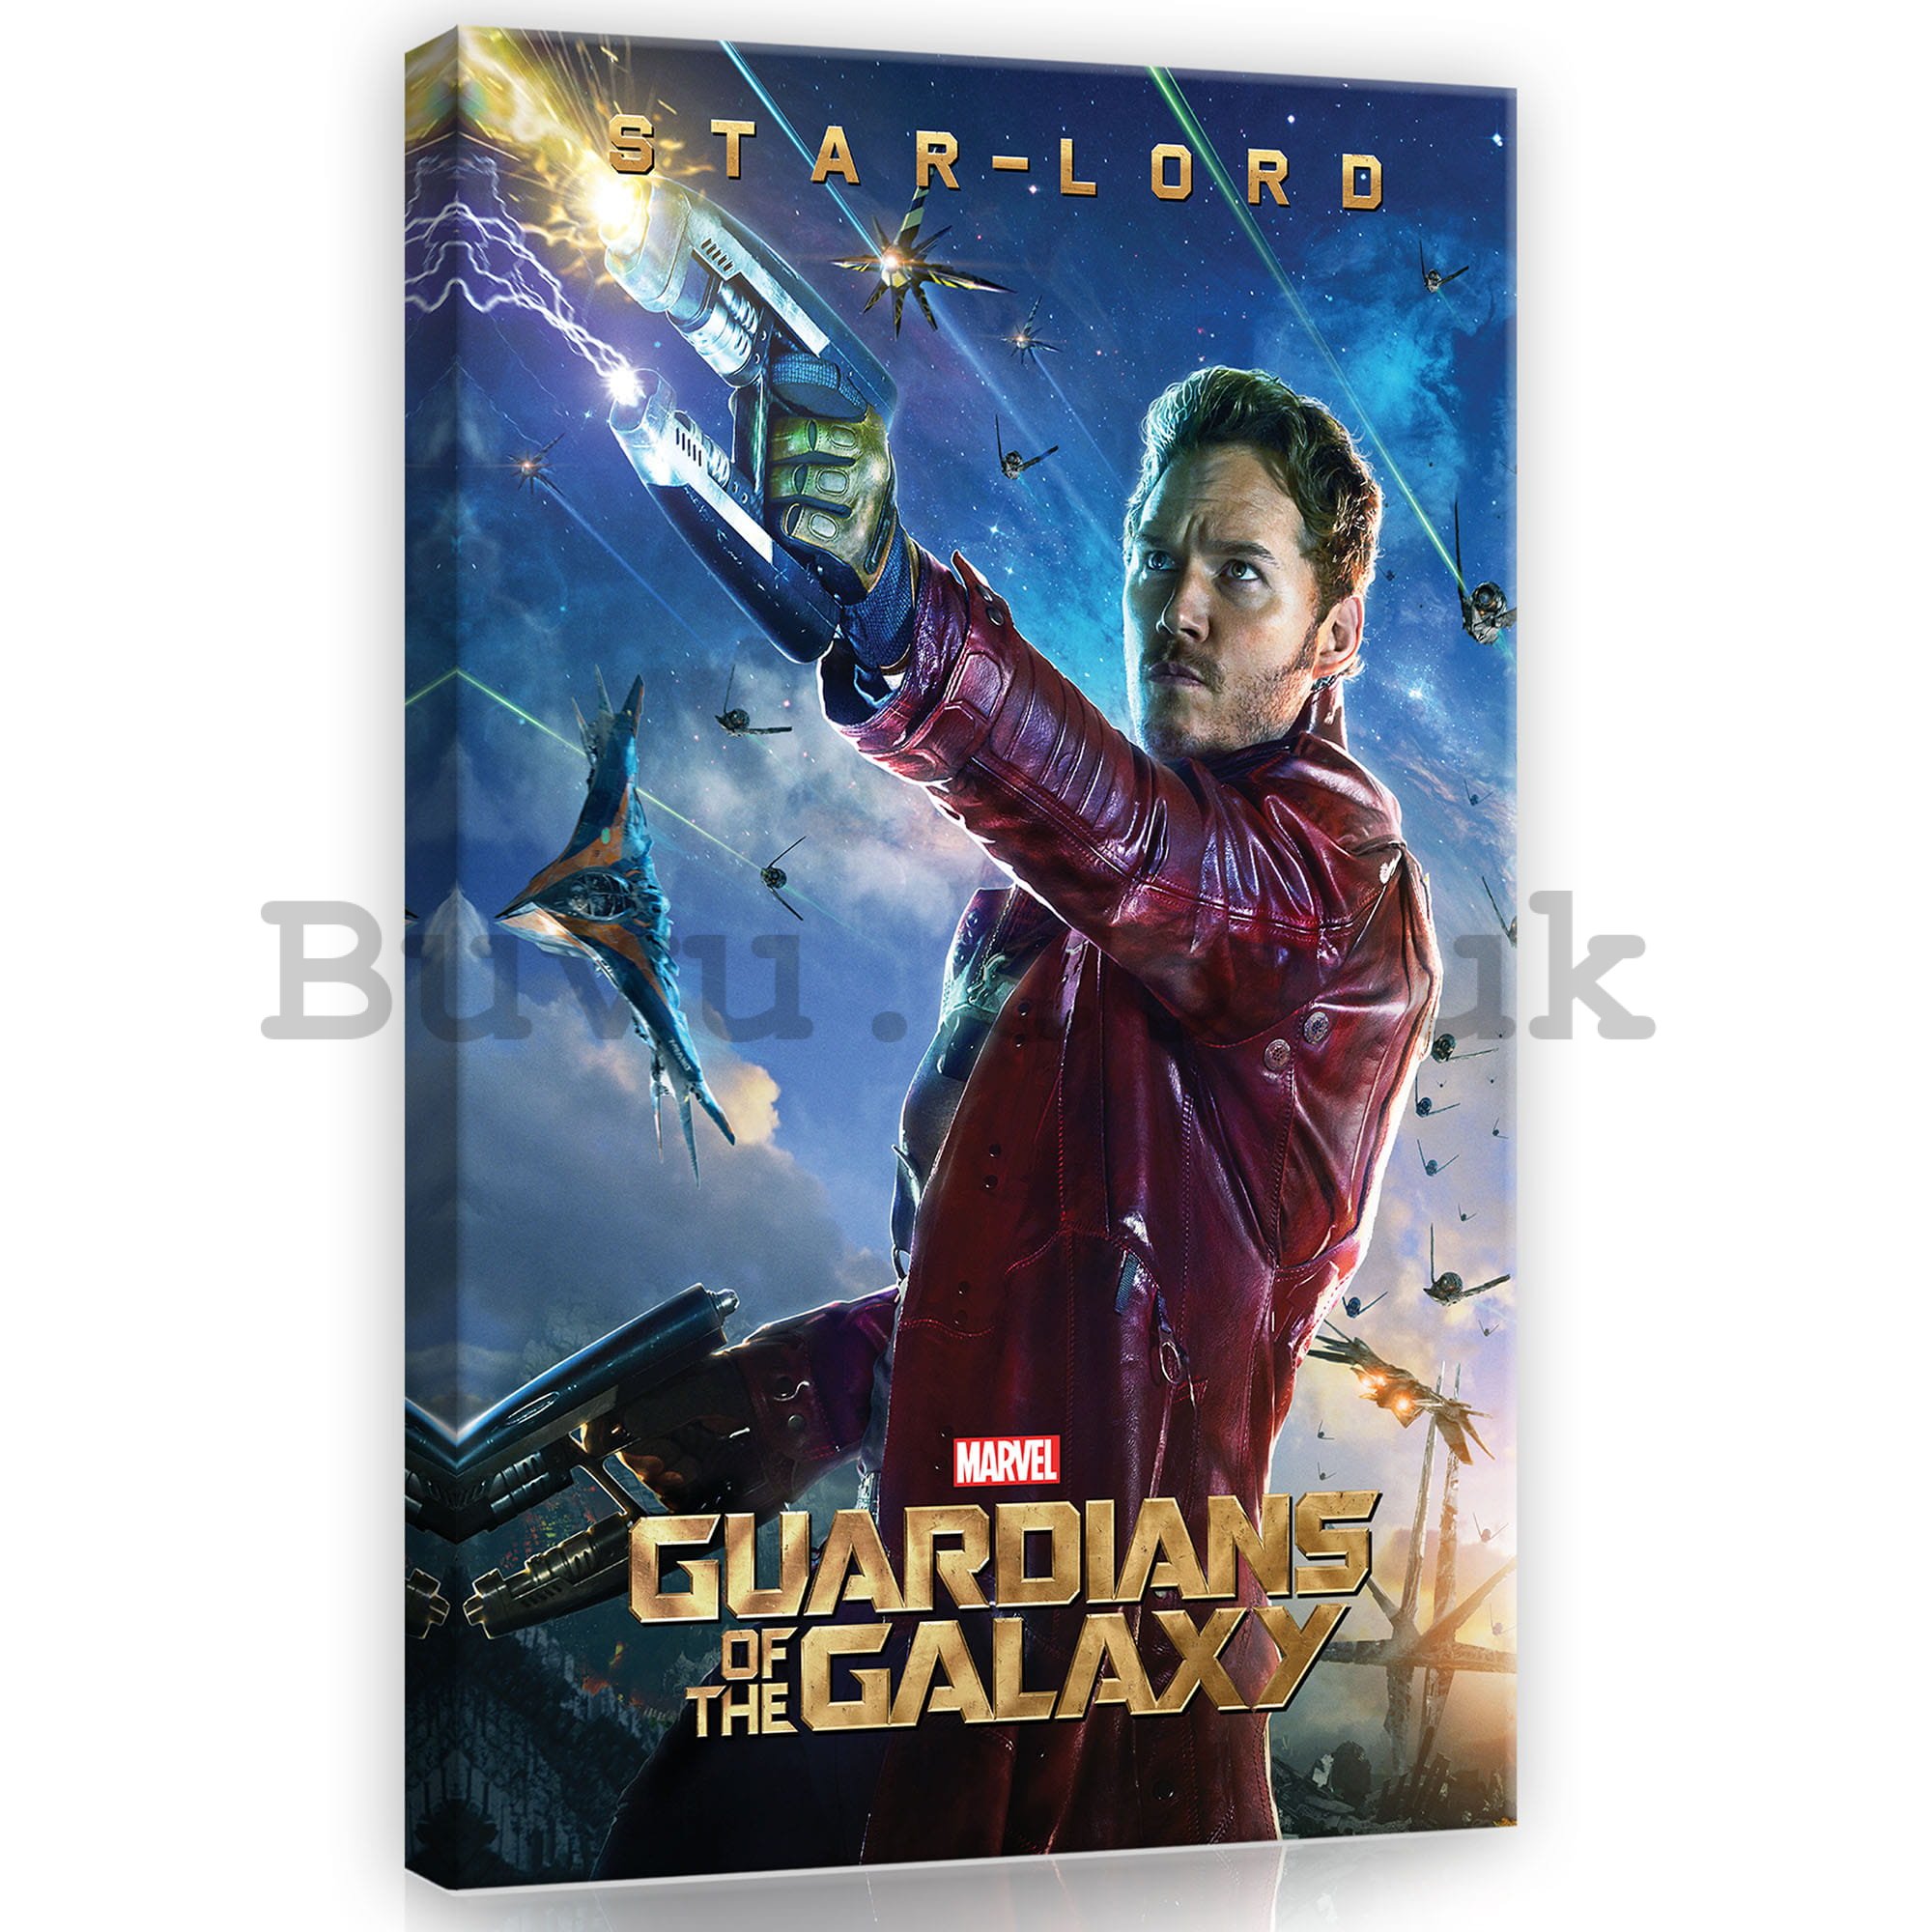 Painting on canvas: Guardians of The Galaxy Star-Lord - 40x60 cm